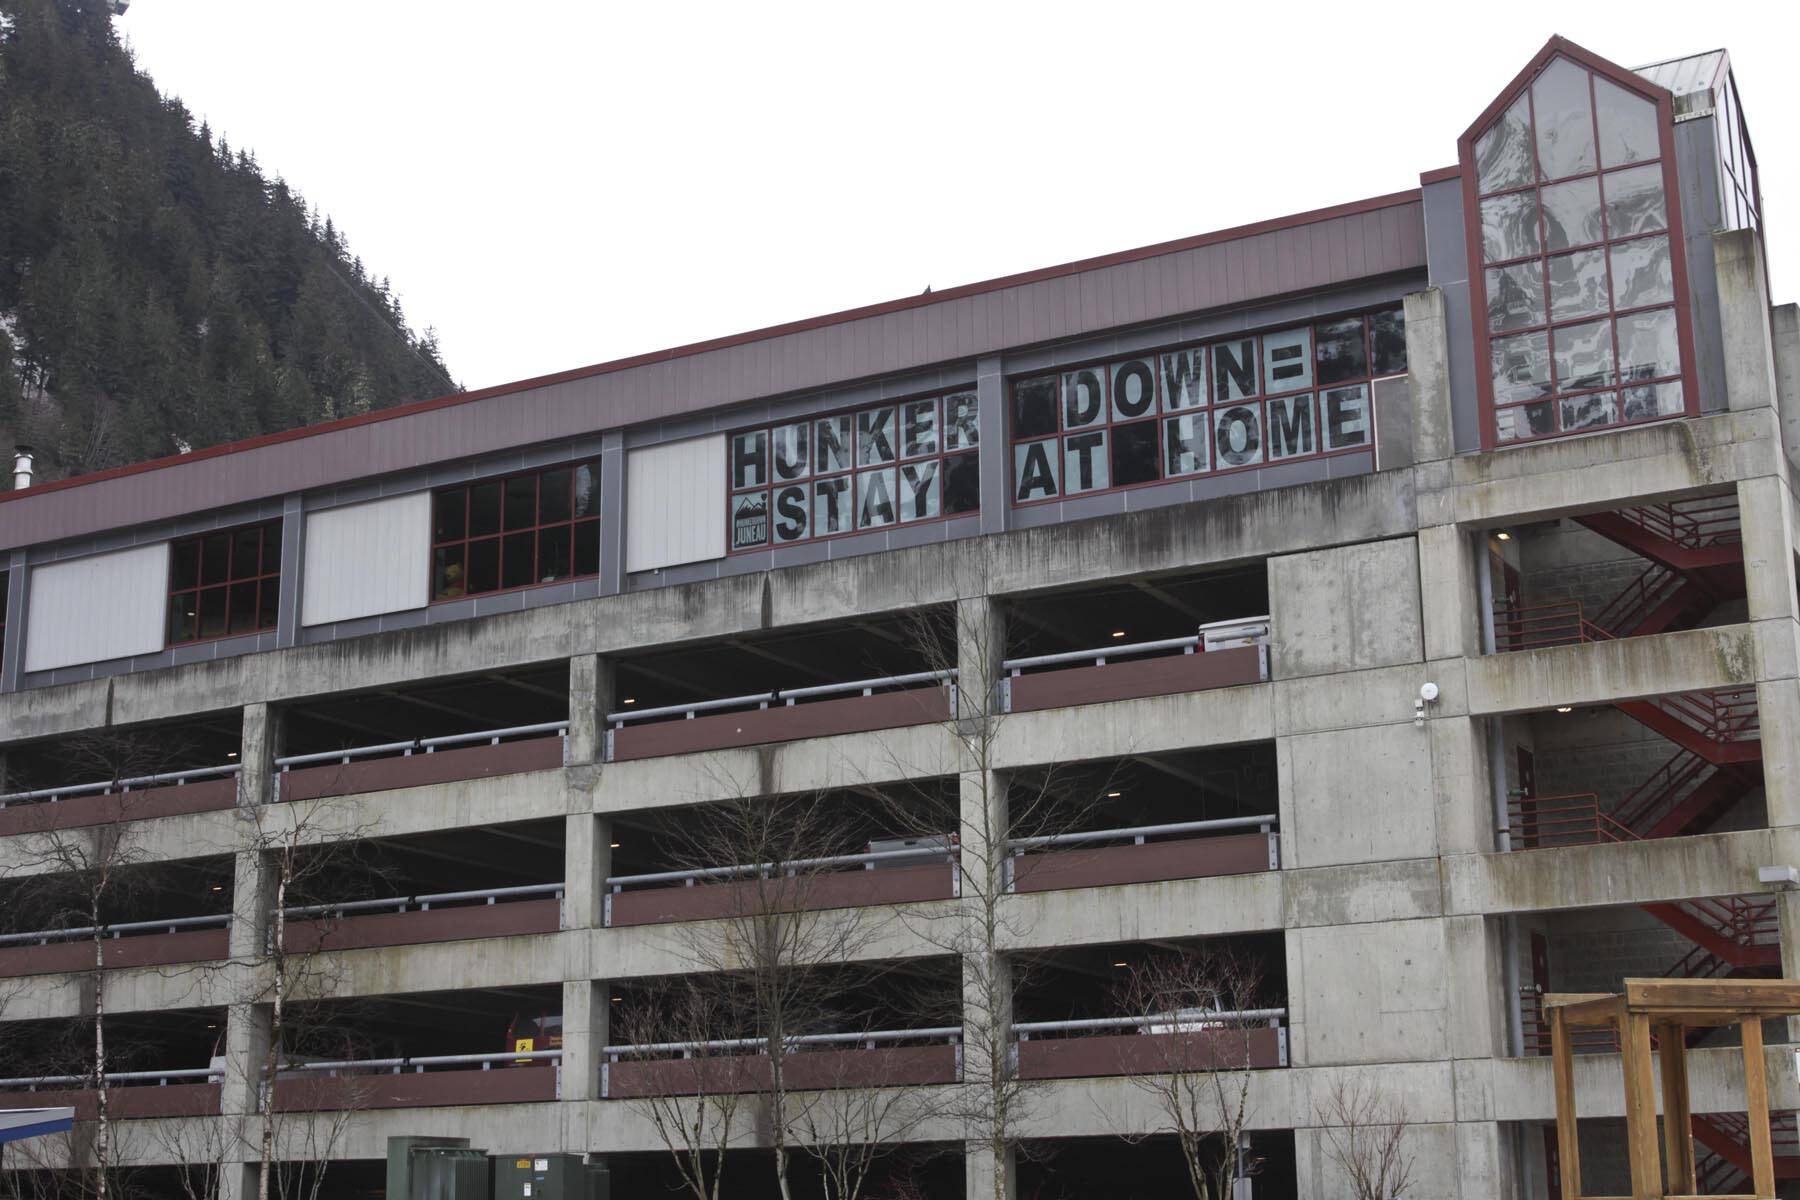 The downtown branch of the Juneau Public Library on April 7, 2020. Residents who wonder what portion of their tax dollars go to support the library can now find out through Taxpayer Receipt. This new, online tool estimates how the City and Borough of Juneau spends property and sales taxes with a personalized and detailed program-by-program breakdown itemizing the number of tax dollars a resident spends on each program (Michael S. Lockett/Juneau Empire File)